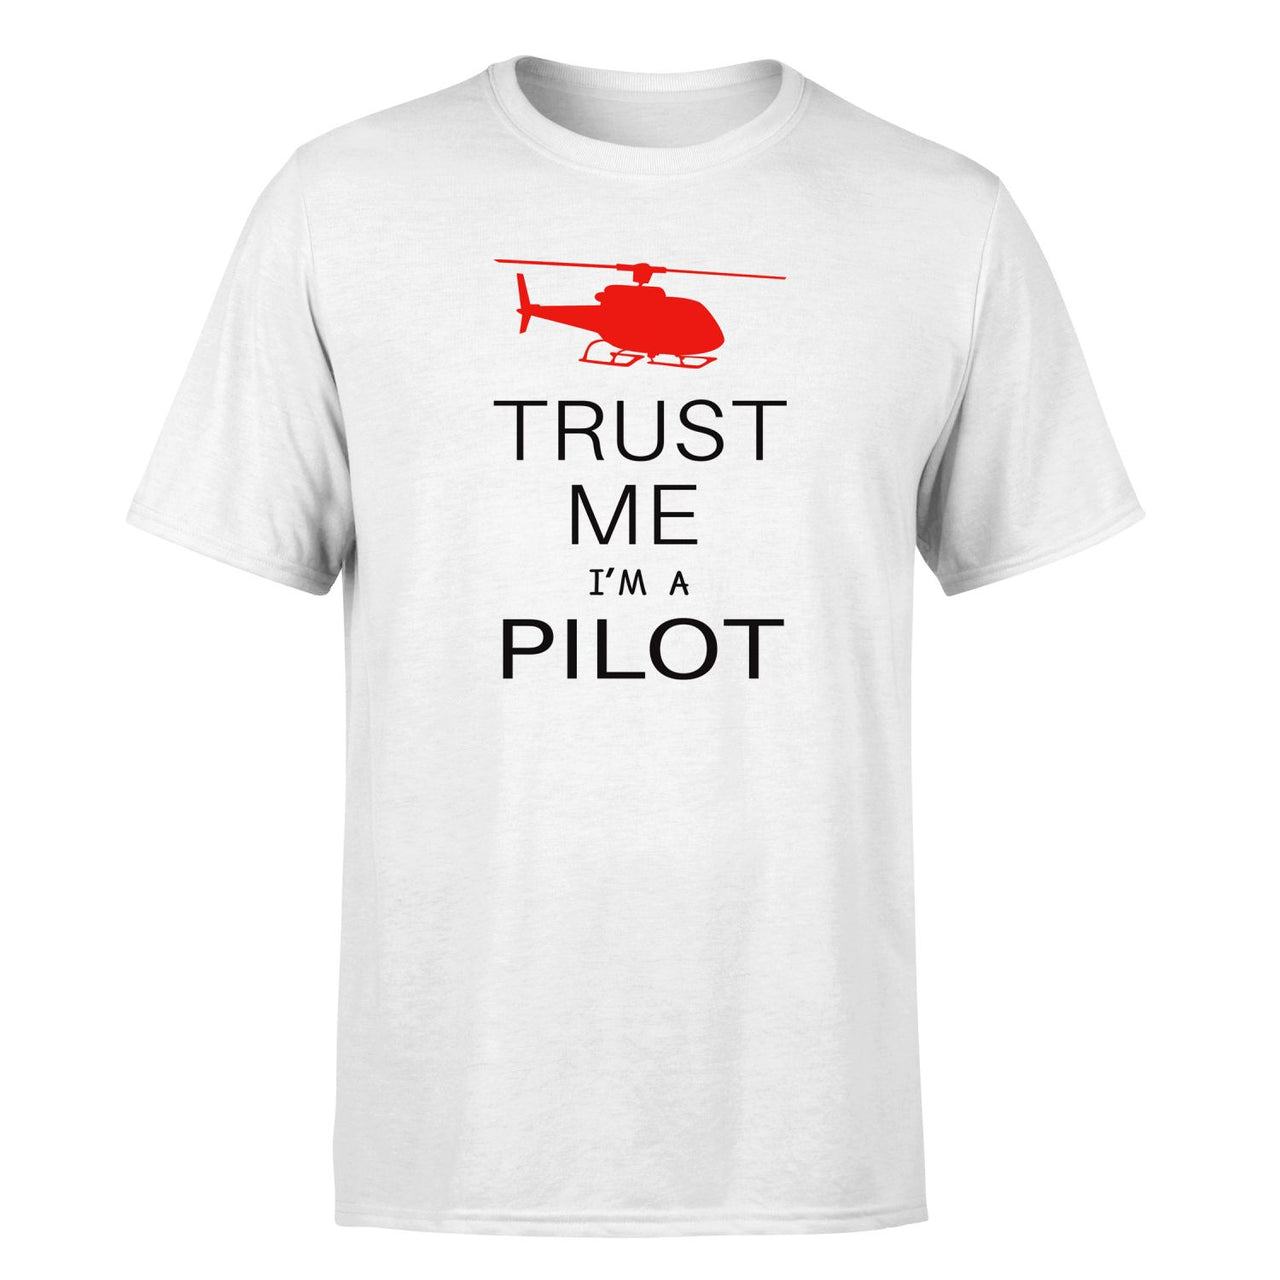 Trust Me I'm a Pilot (Helicopter) Designed T-Shirts